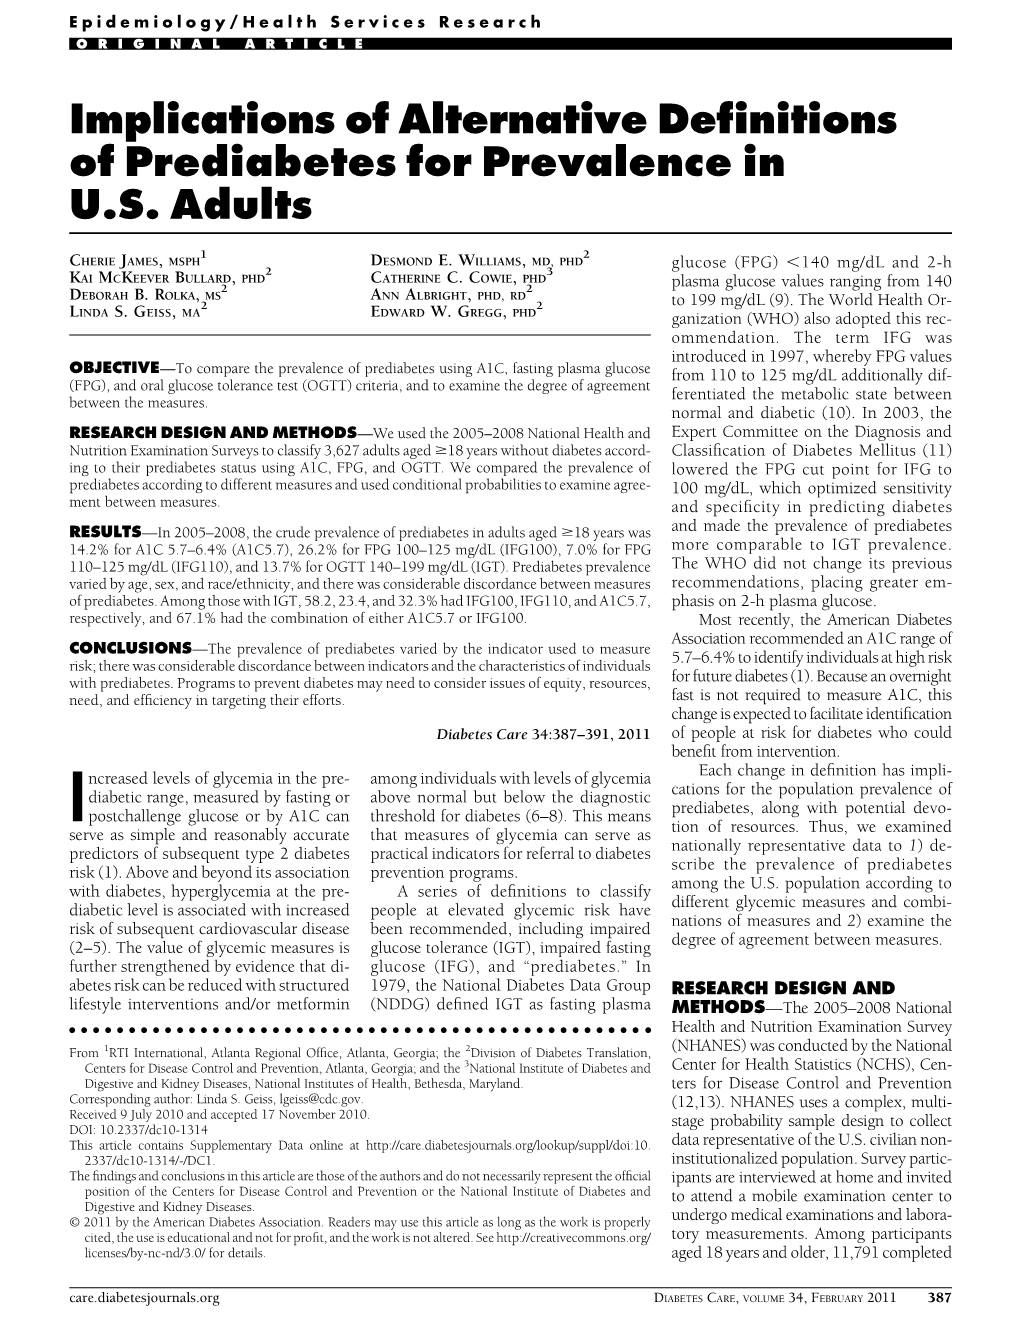 Implications of Alternative Definitions of Prediabetes for Prevalence In